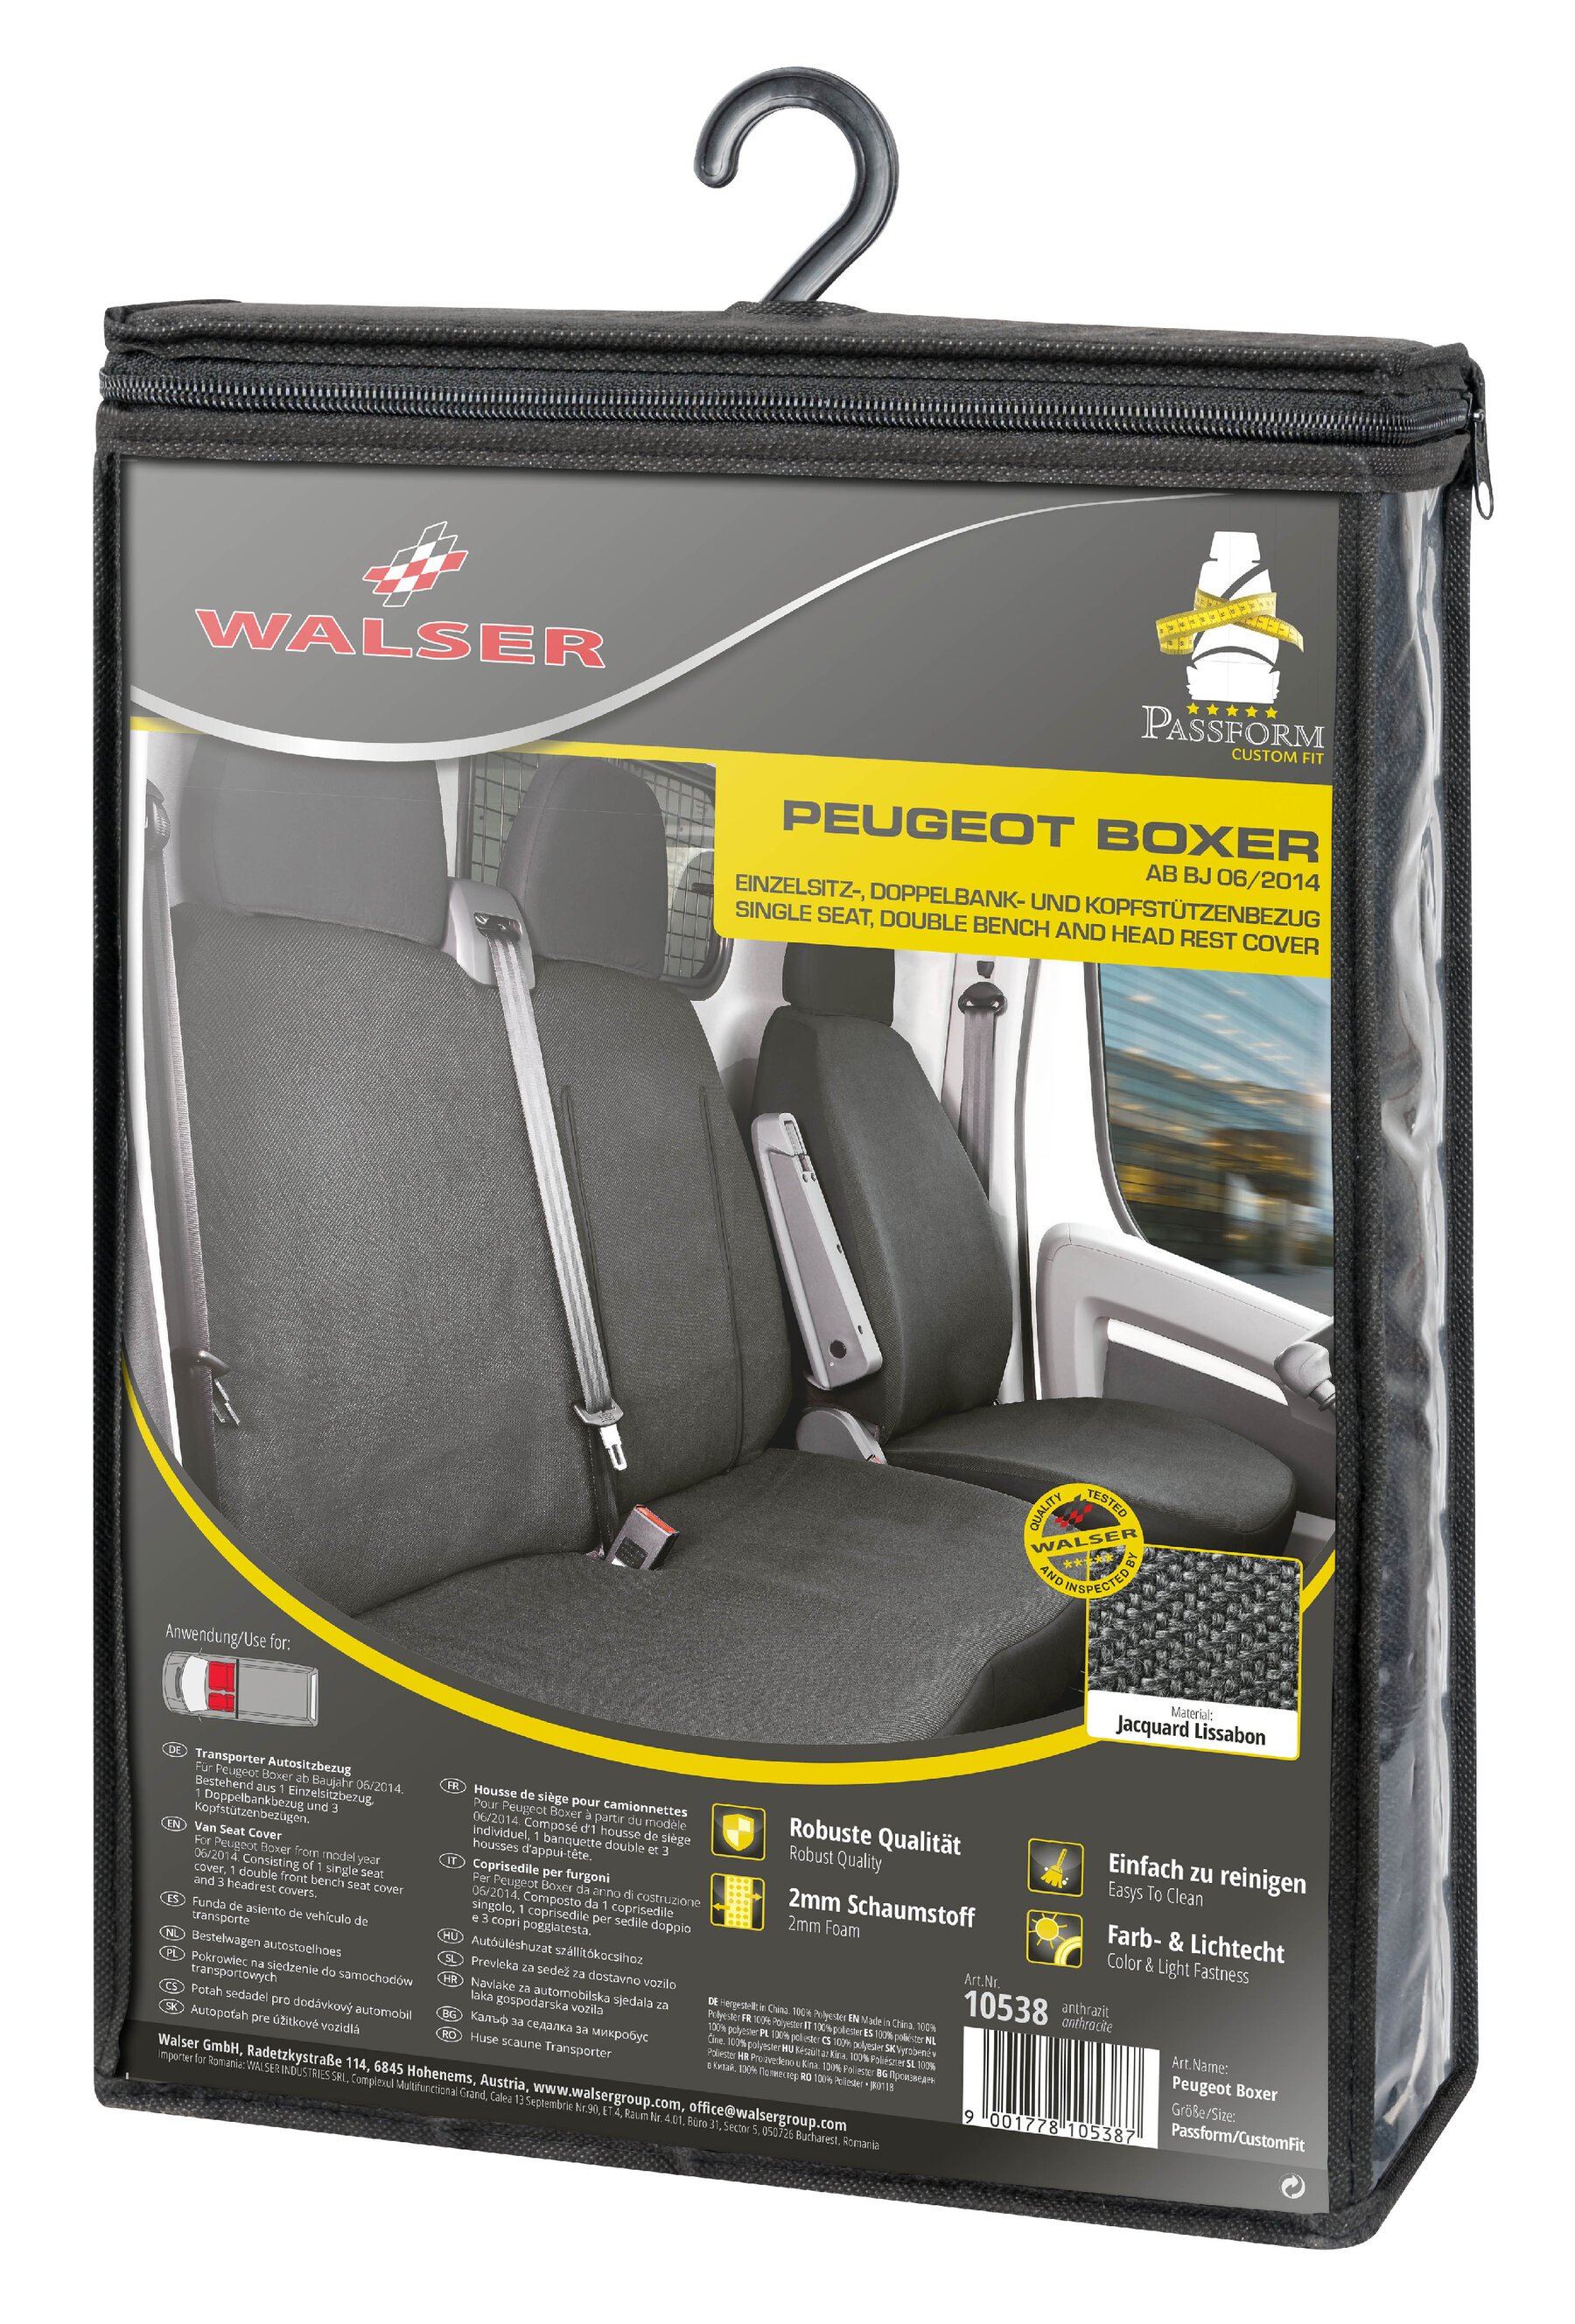 Seat cover made of fabric for Peugeot Boxer, single seat cover, double seat cover